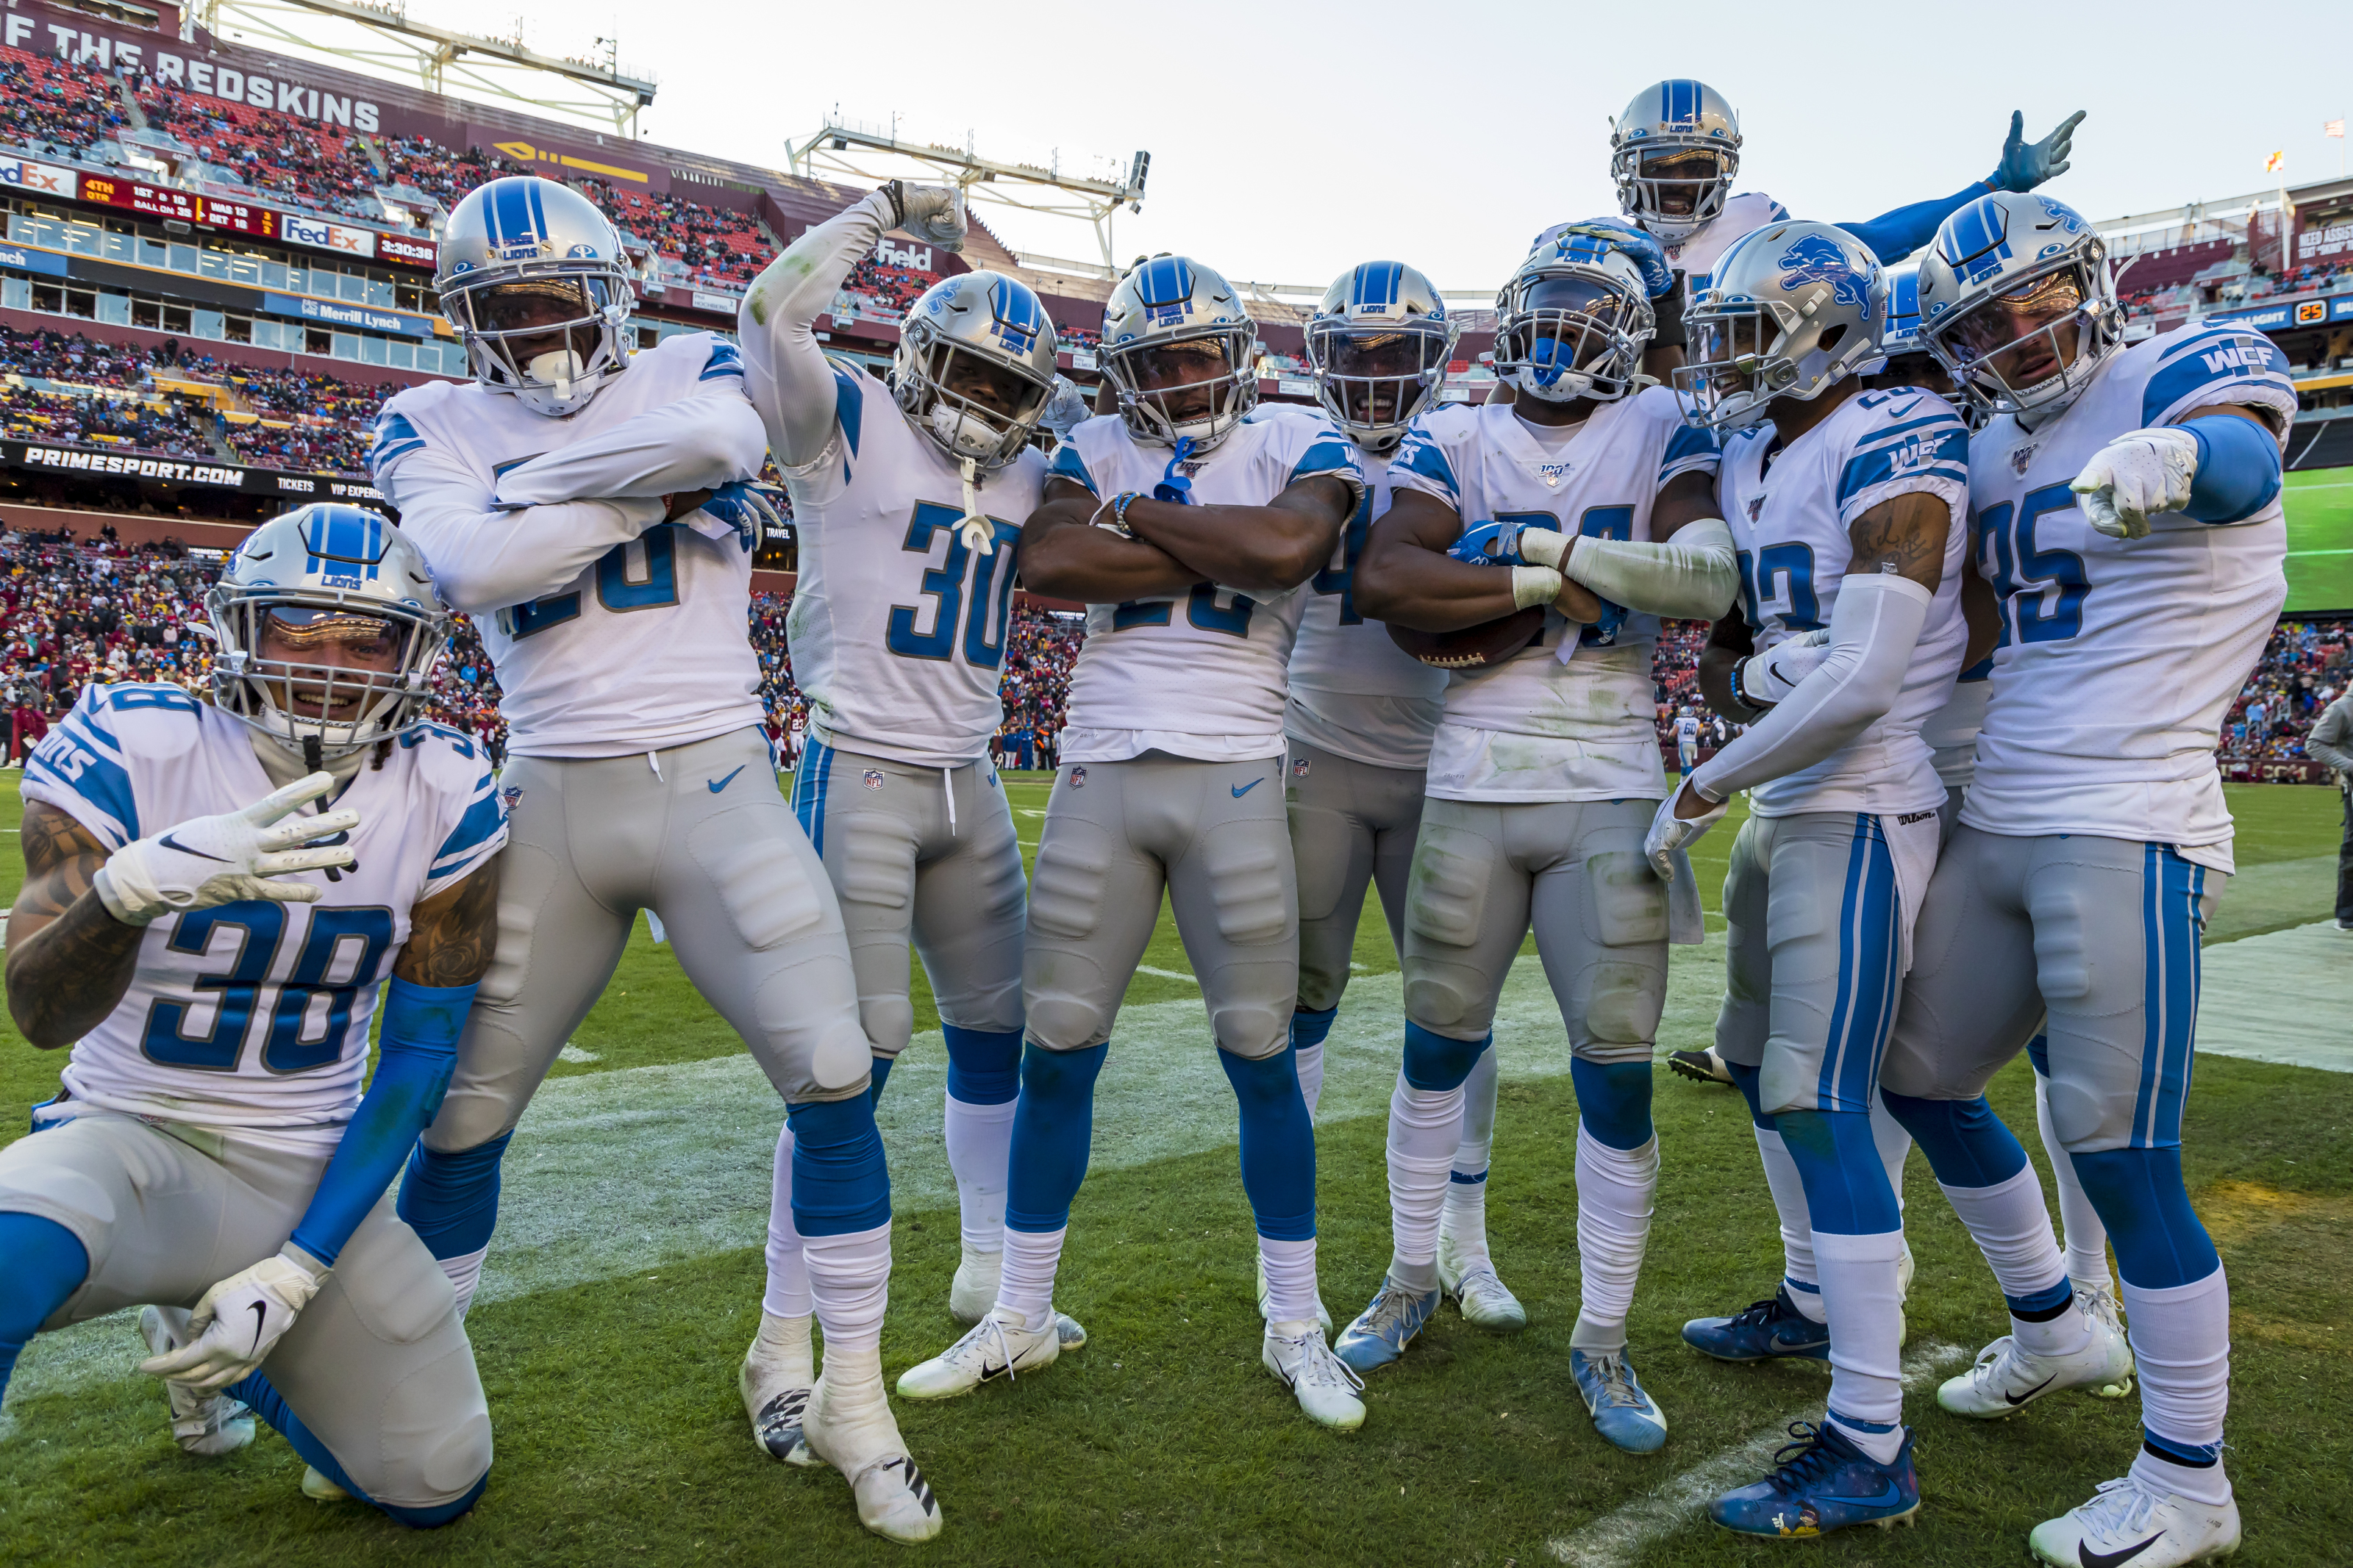 2020 Detroit Lions Betting Preview: Is there value on the Lions?